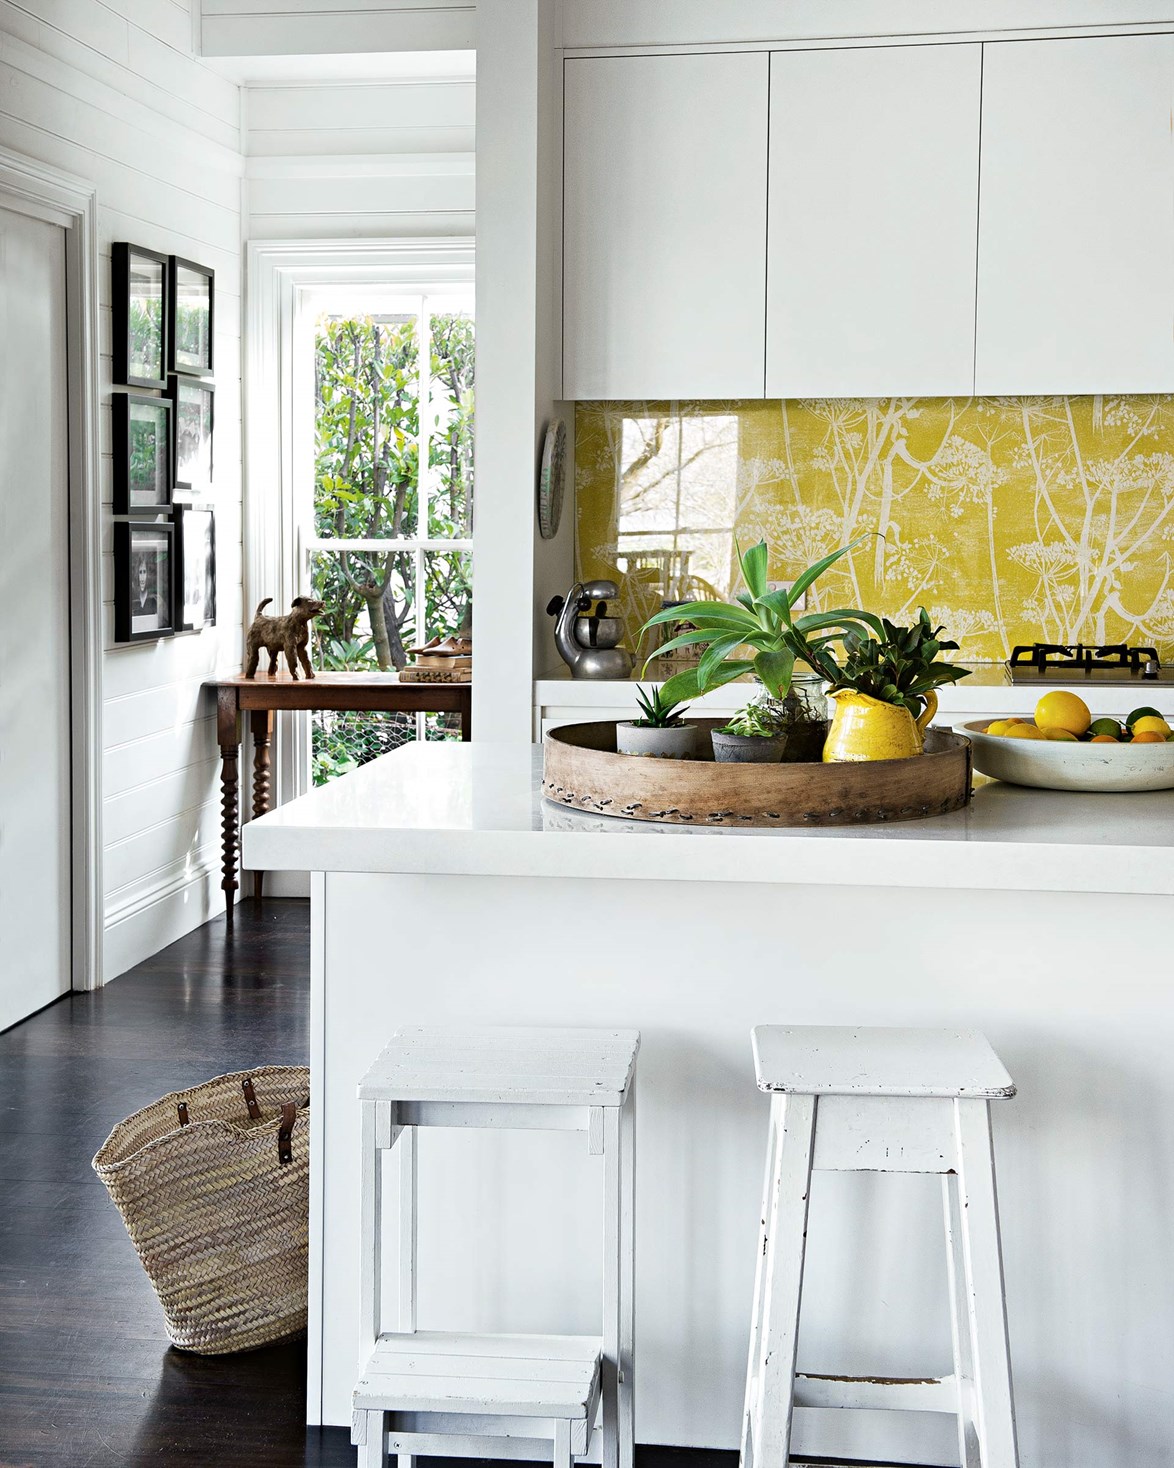 Starting at the front door, sunny pops of yellow are a recurring theme throughout this revamped [weatherboard cottage in Bowral](https://www.homestolove.com.au/weatherboard-cottage-in-bowral-13647|target="_blank"). In the kitchen, the owners opted for a glass splashback featuring Cole & Son wallpaper in Cow Pasture to bring colour, pattern and character into what could've been a sterile white room.